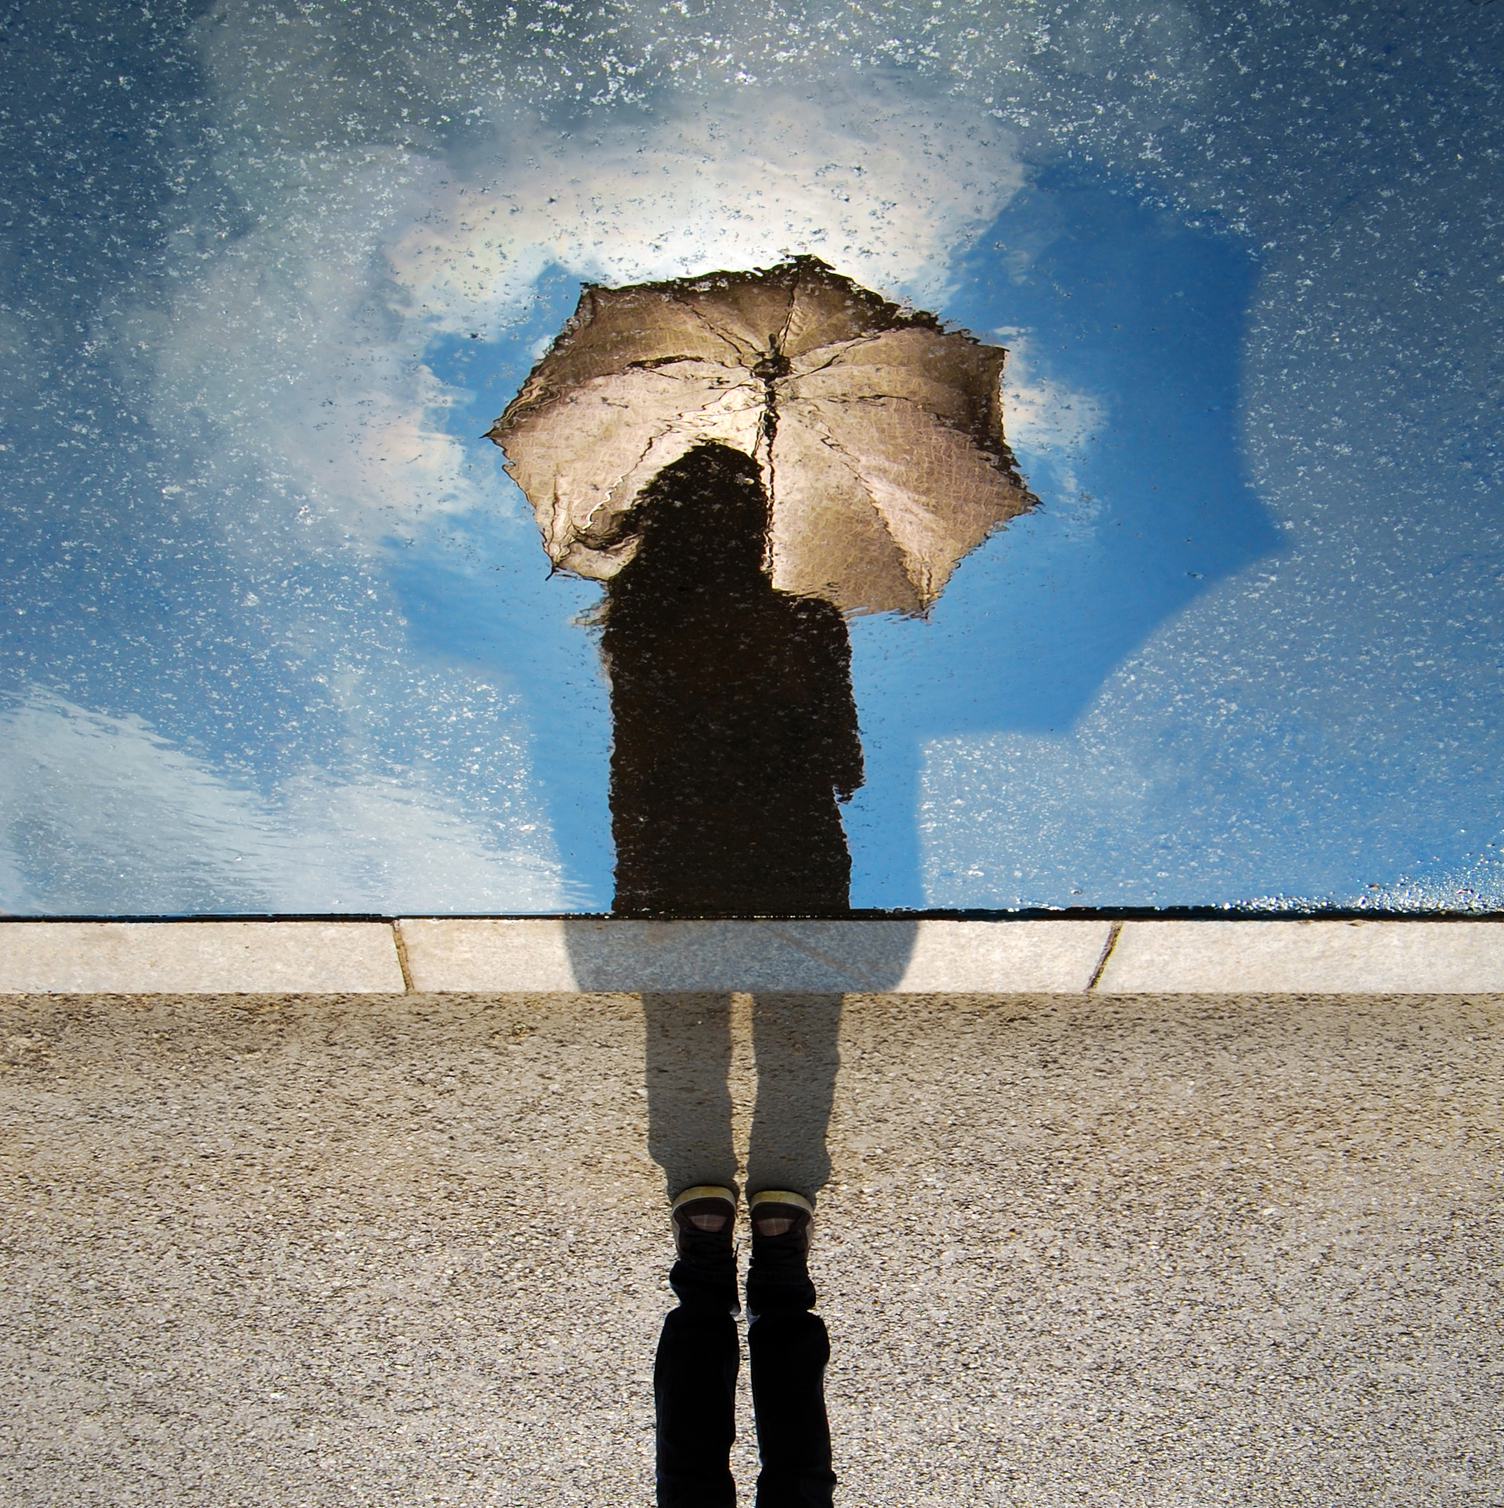 Puddle Reflection Silhouette of Girl with Umbrella against Blue Sky